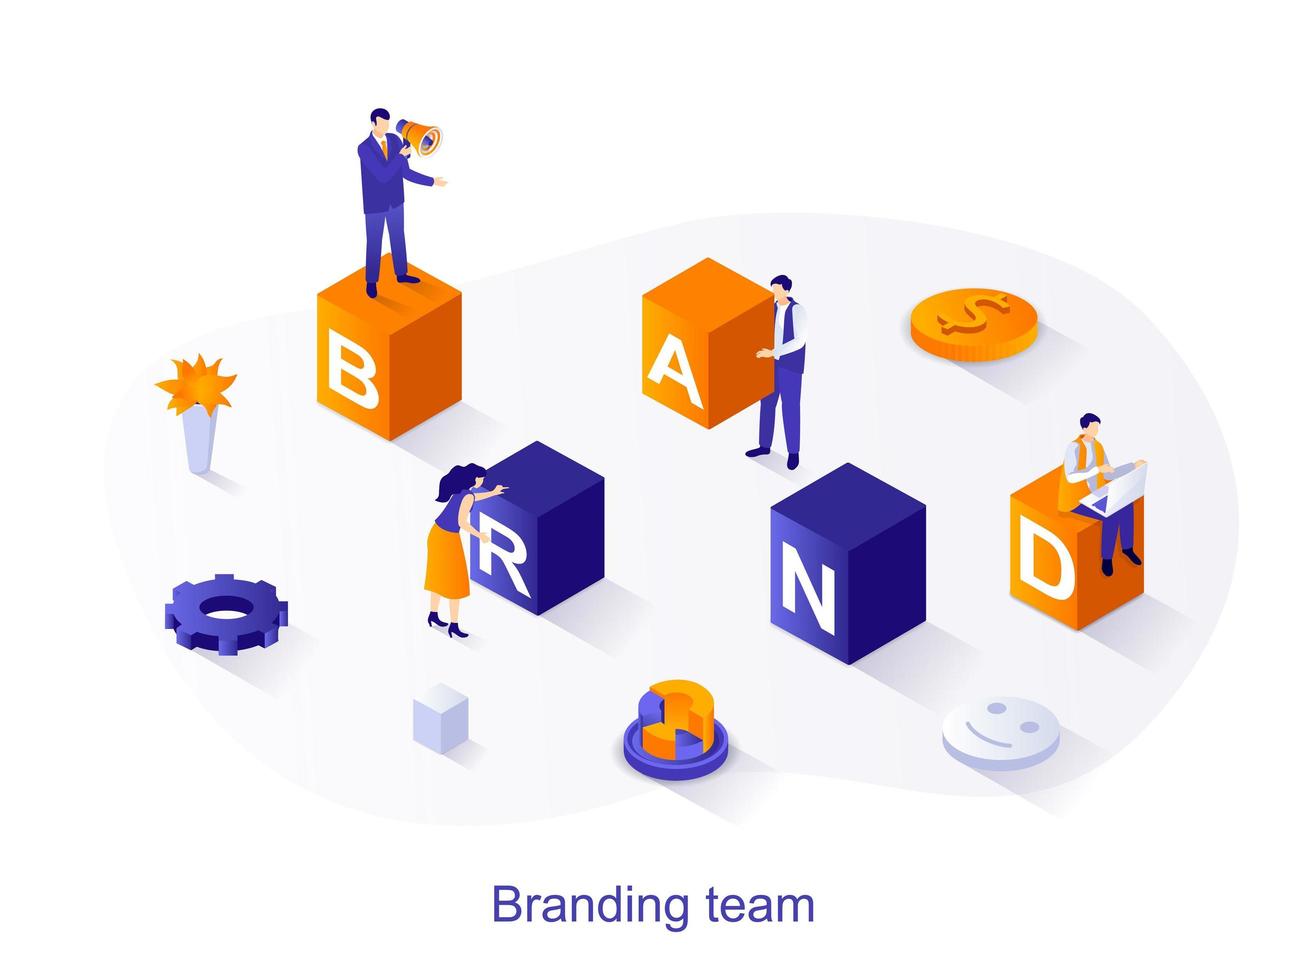 Branding team isometric web concept. People create brand corporate identity, reputation management. Company development success strategy scene. Vector illustration for website template in 3d design